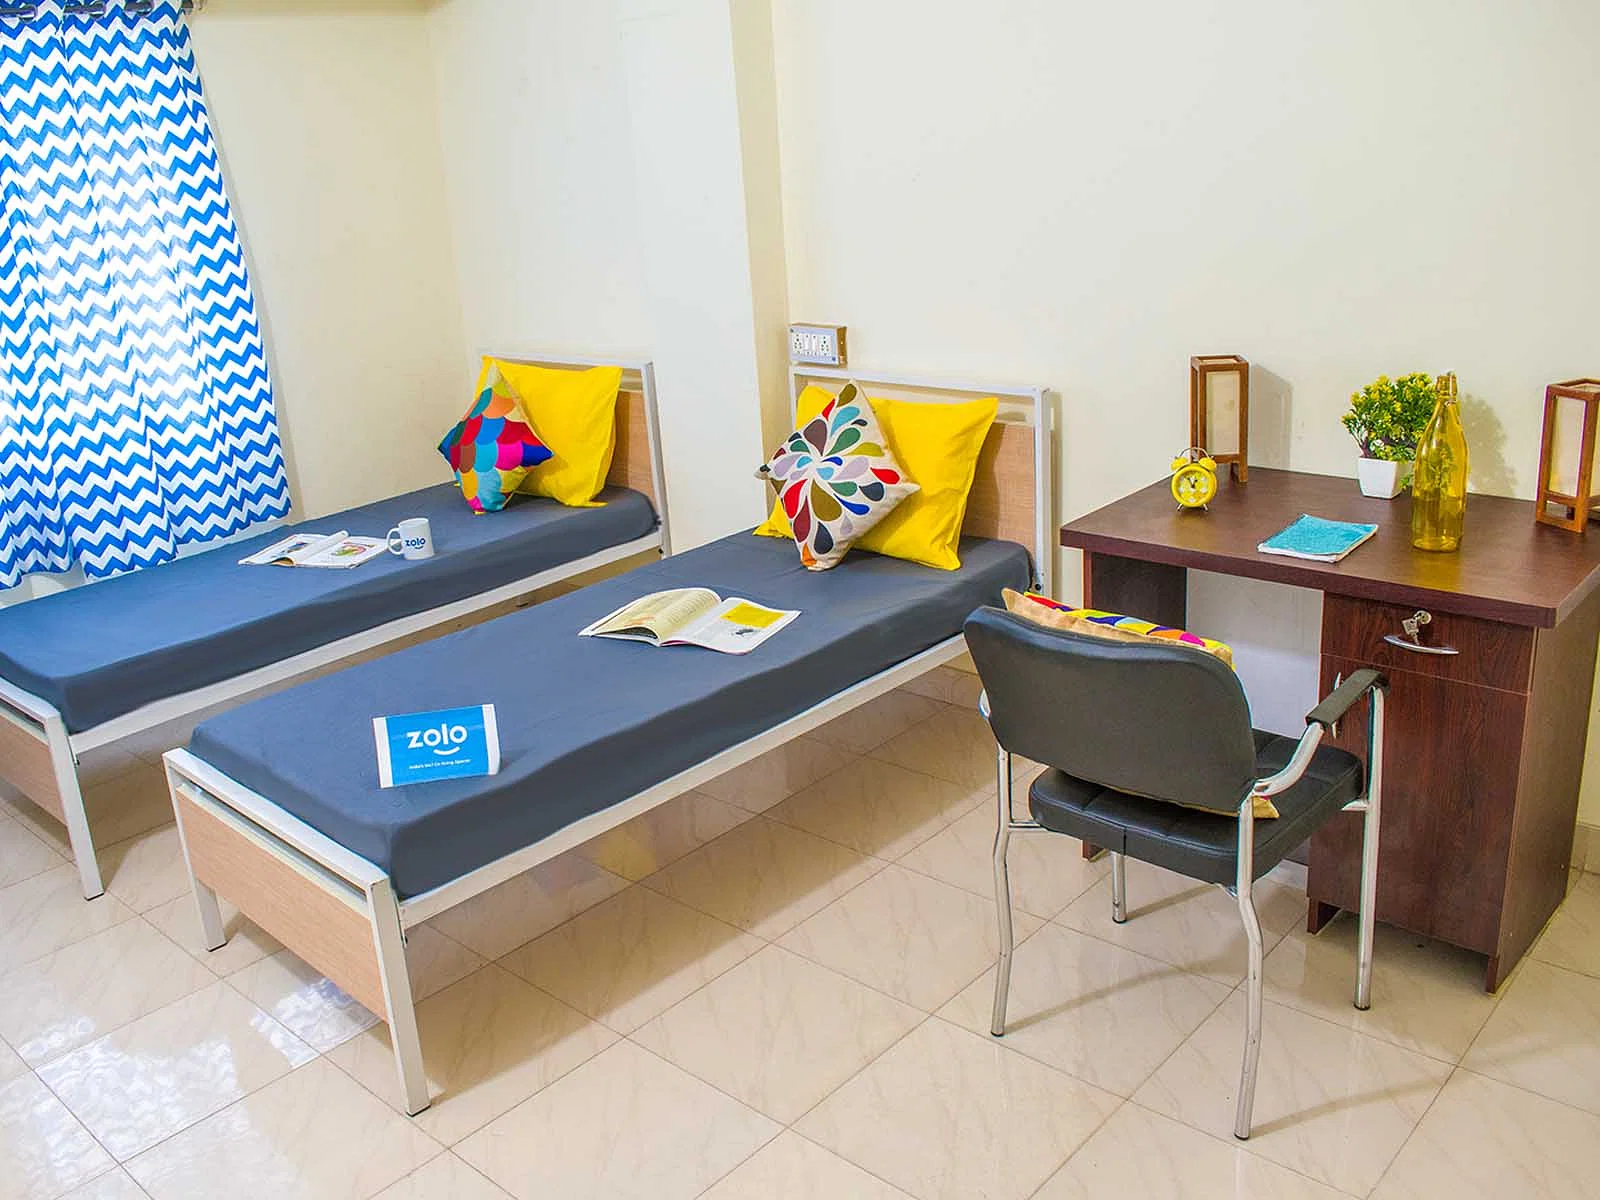 fully furnished Zolo single rooms for rent near me-check out now-Zolo Empire